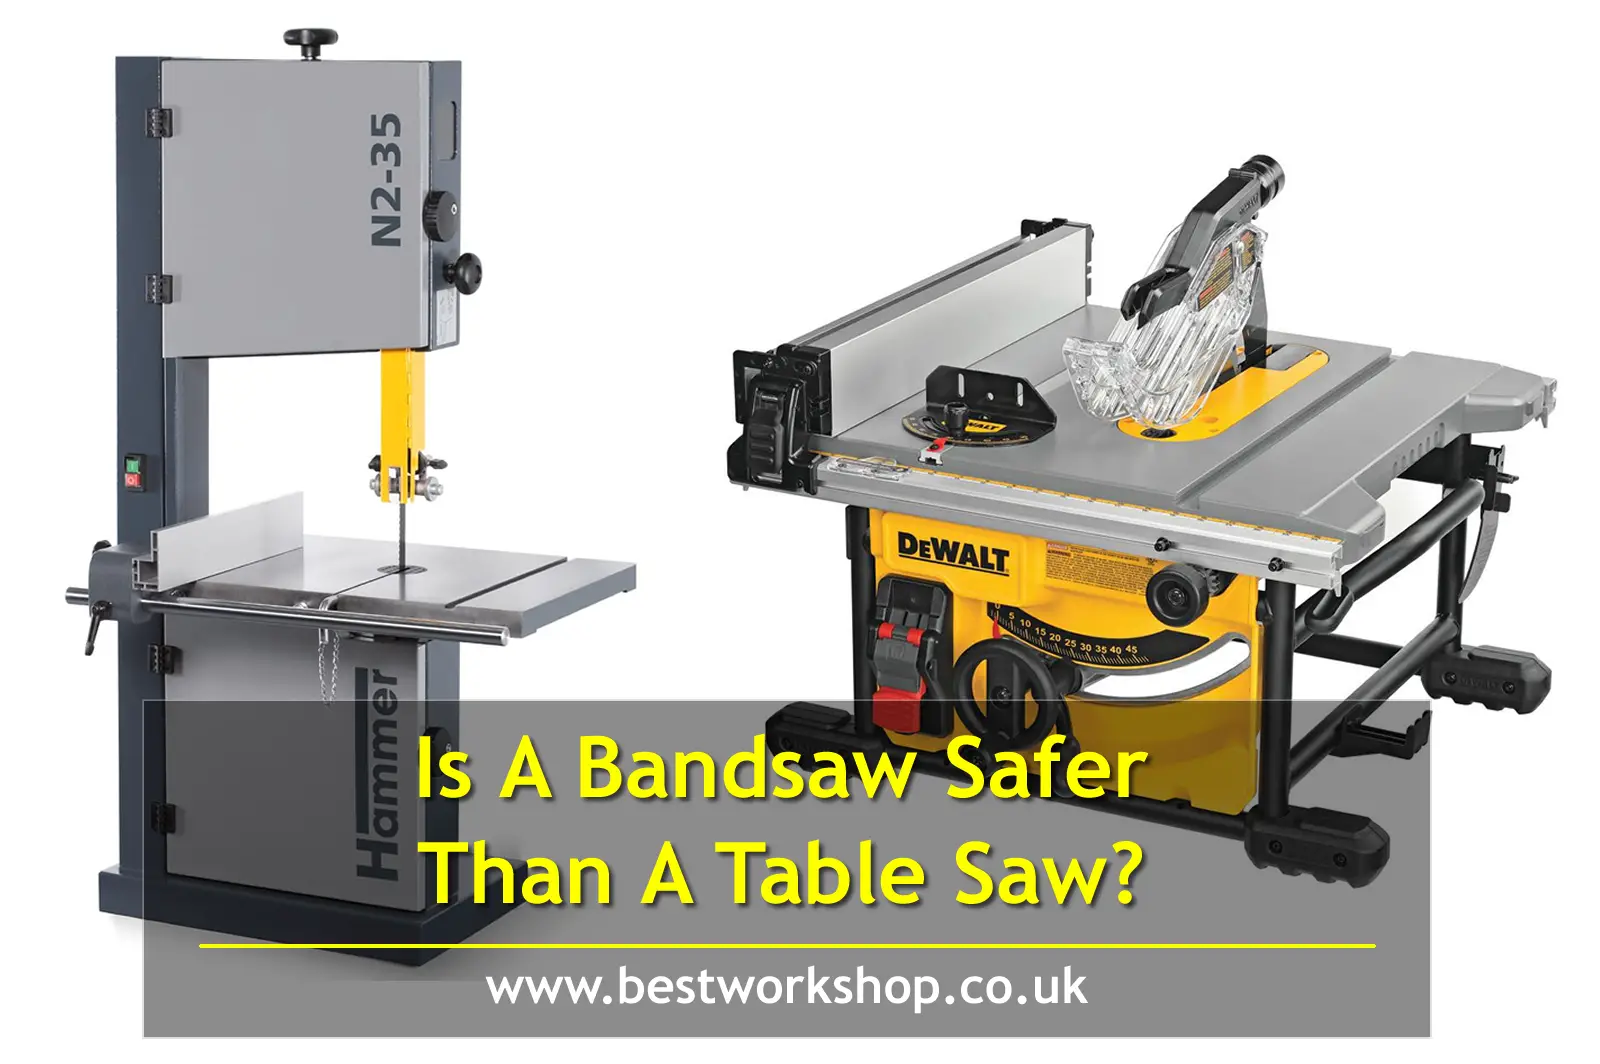 Is A Bandsaw Safer Than A Table Saw? How dangerous are they?